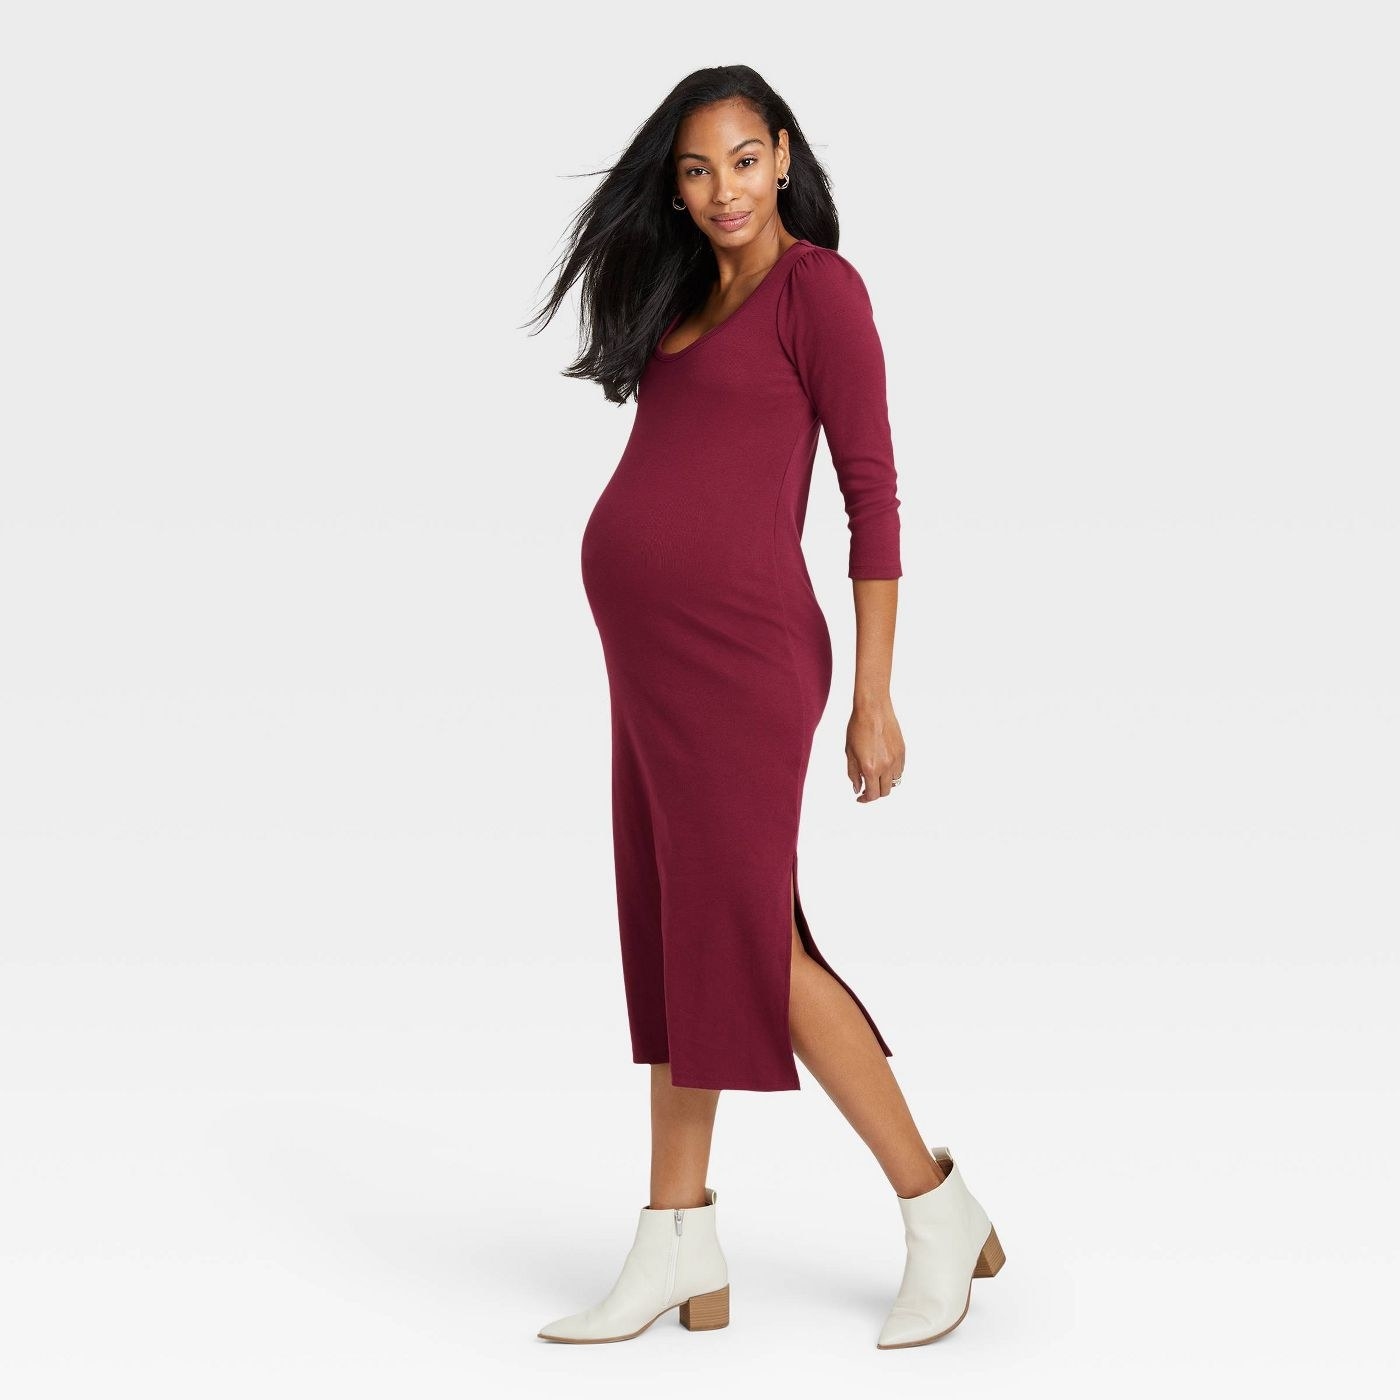 model with a baby bump in a merlot colored tee dress with slits up the sides